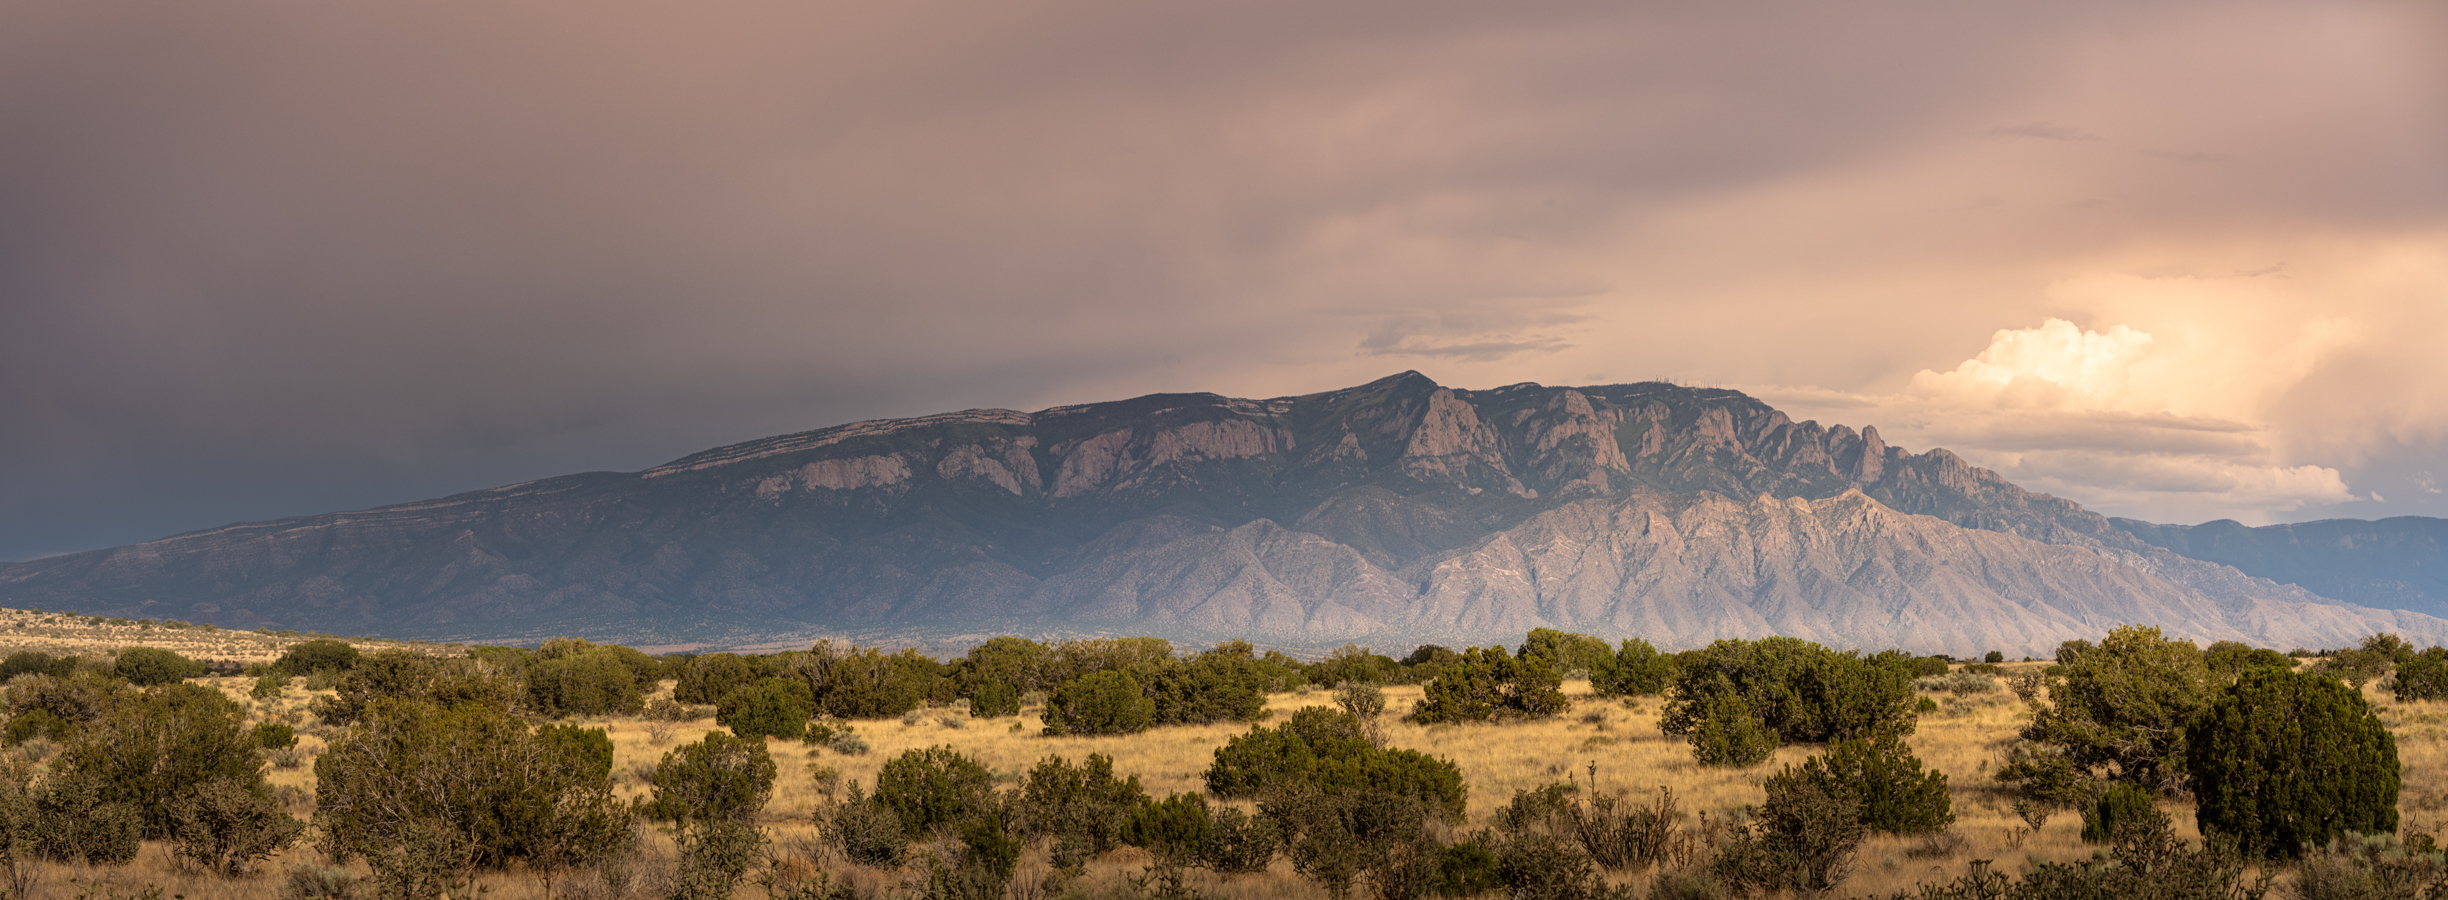 The Sandia Mountains of Albuquerque bask in warm summer light after a thunderstorm. 